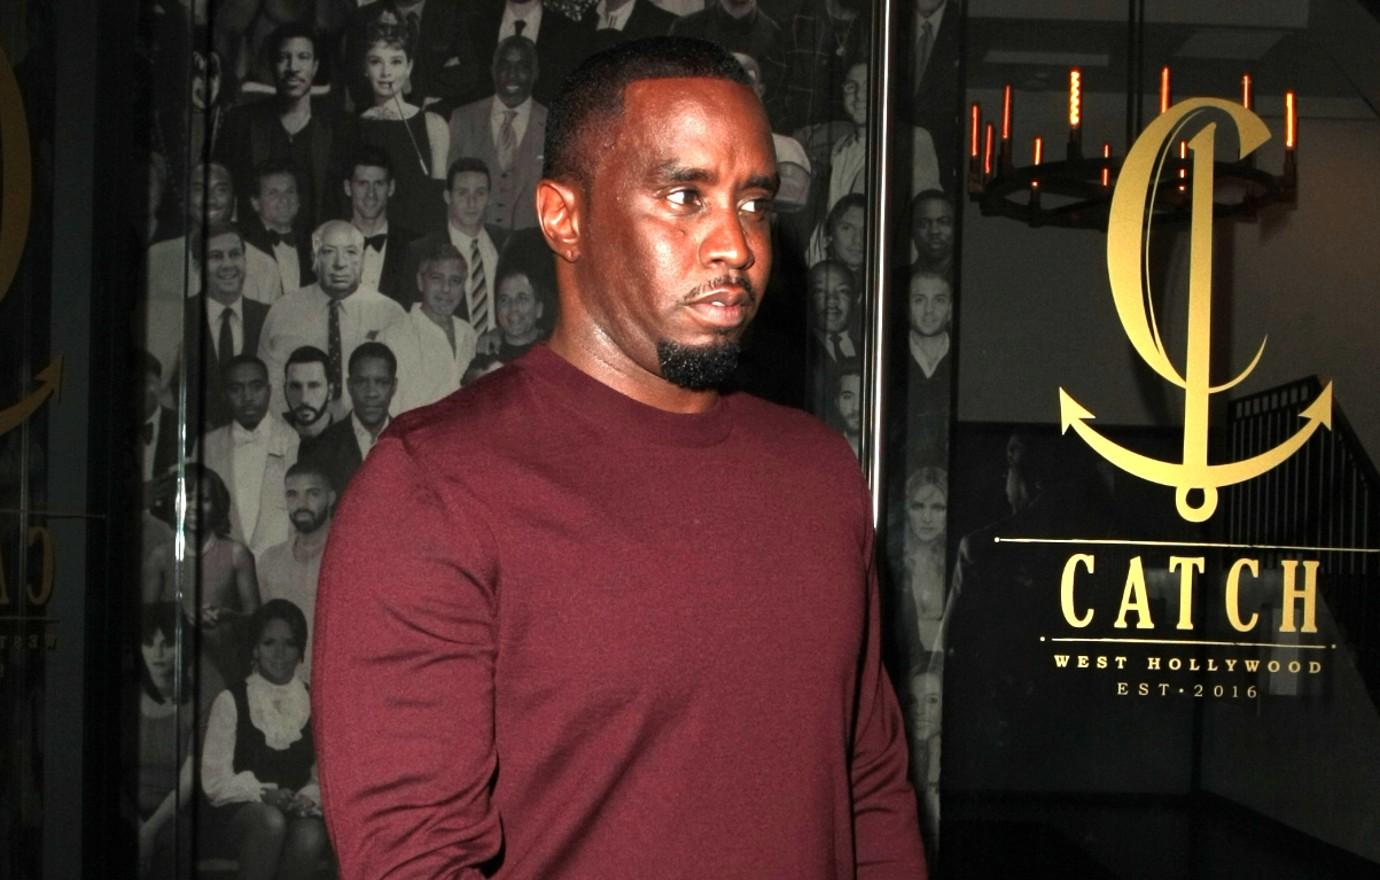 Sean 'Diddy' Combs Says Beef With Mase Squashed: 'Brothers Fight